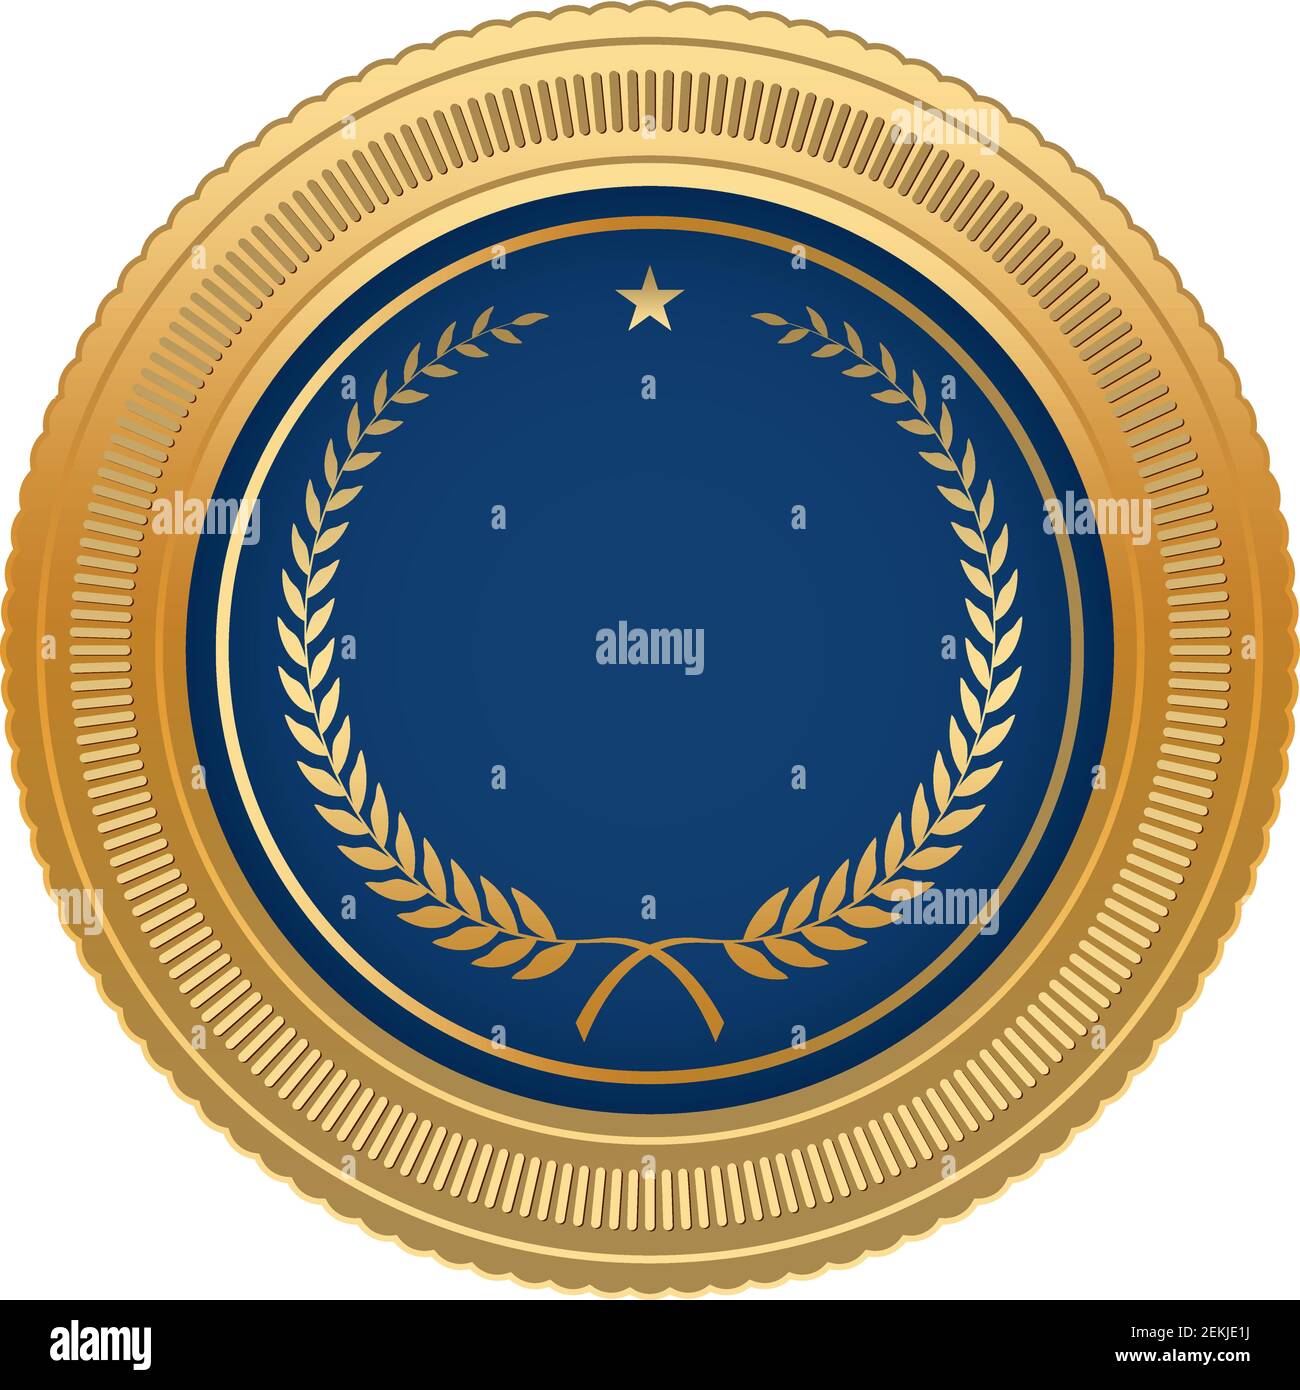 Medal Award vector with gold frame and blue medal on white isolated back. Vector Illustration with gold frame, laurel wreath, star and blue medal. Stock Vector